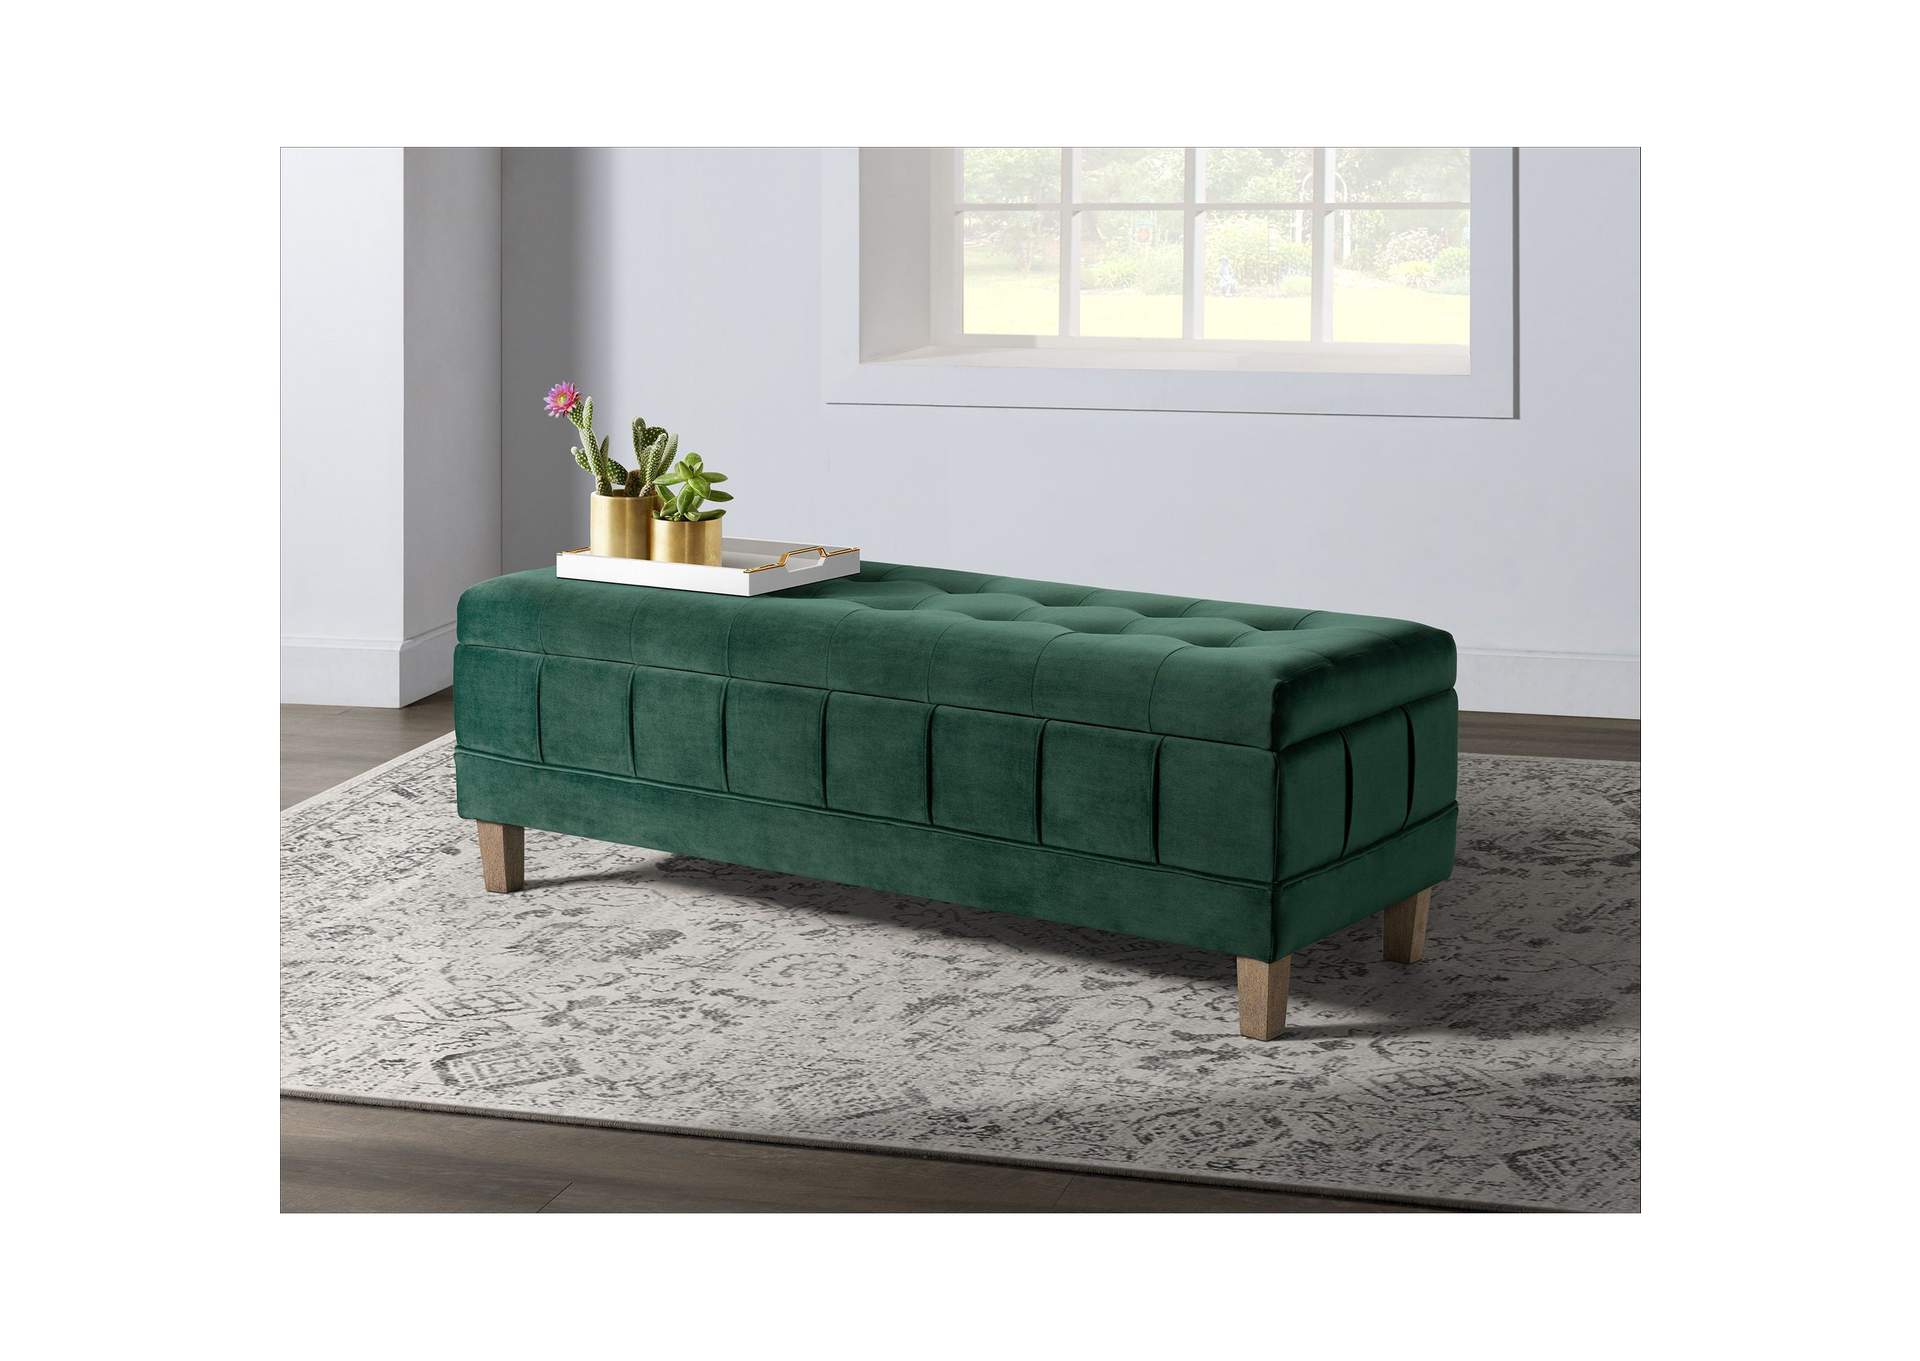 Crosby Bench Royale Evergreen,Elements